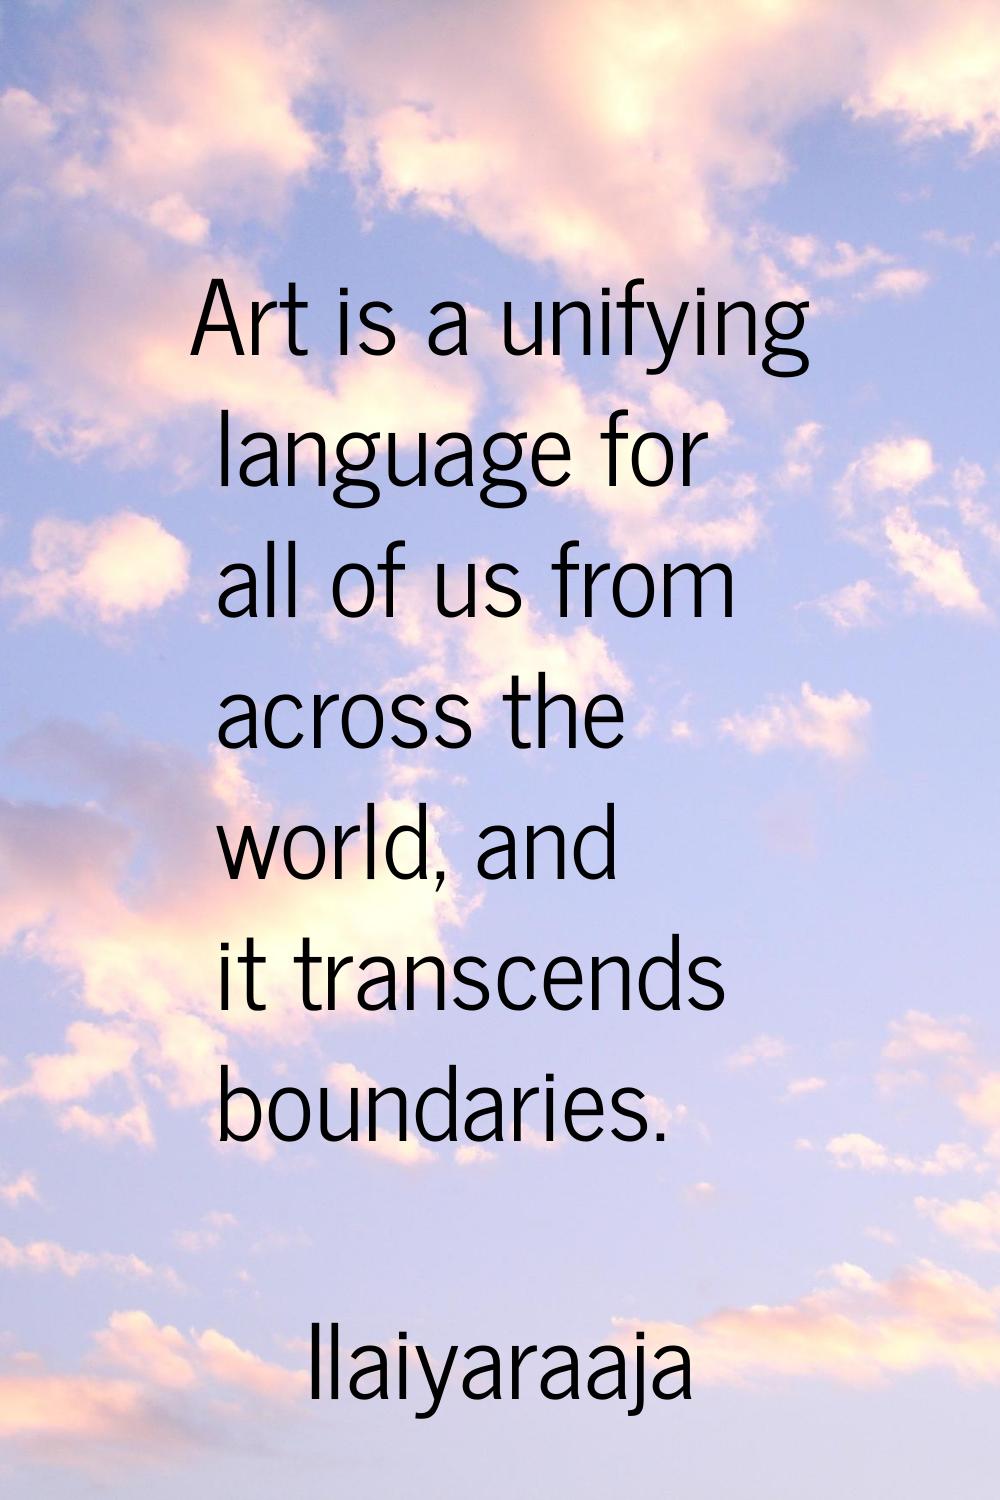 Art is a unifying language for all of us from across the world, and it transcends boundaries.